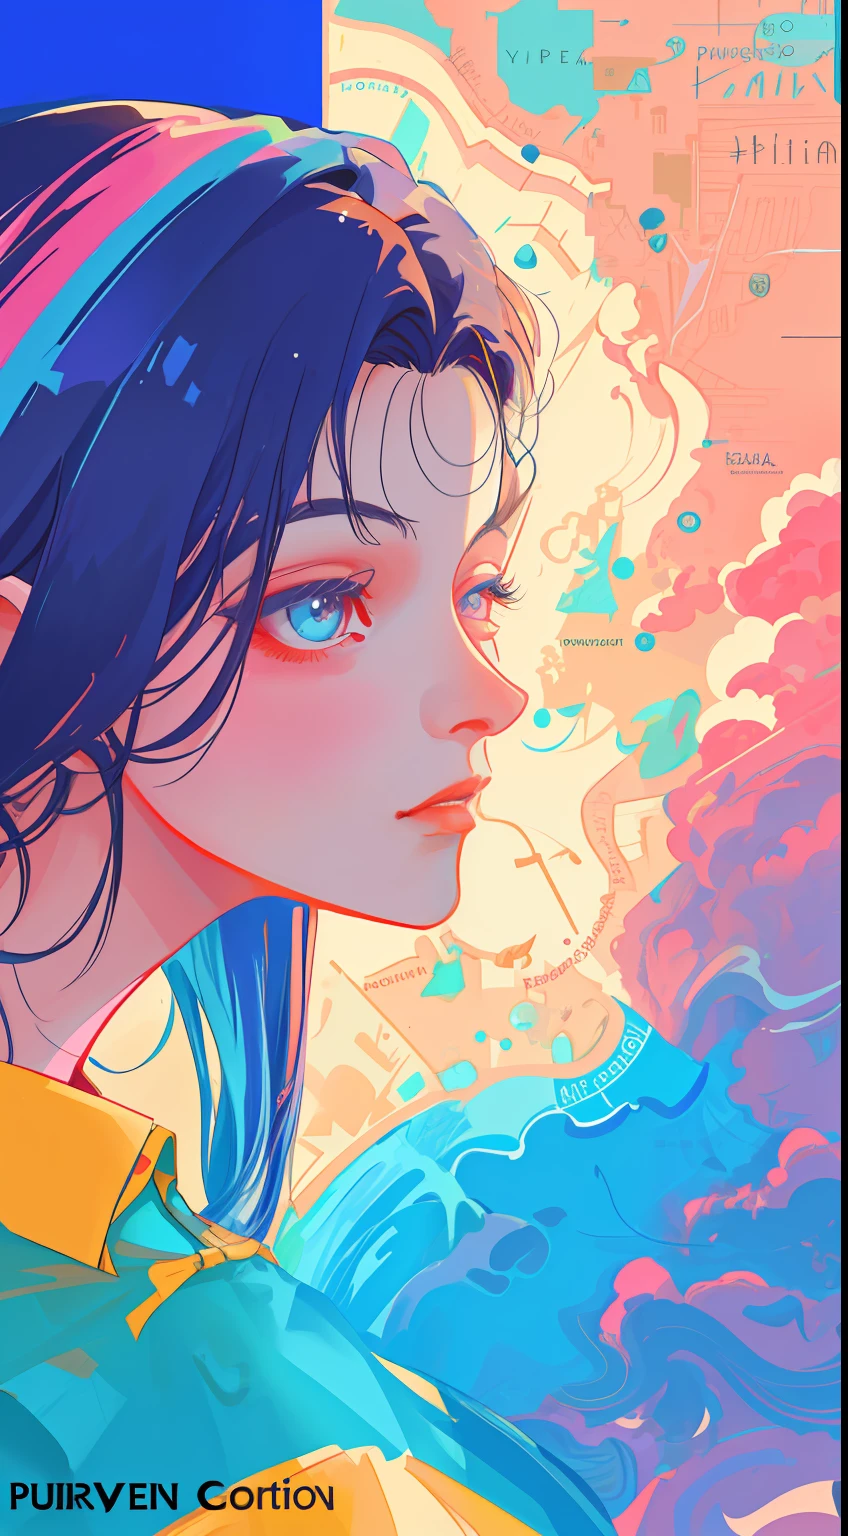 A couple，Couple avatar，a young man and a woman，Everyone was happy，rebelliousness，The picture is colorful，Burst，Strong collision force，Lively and youthful，Clear facial features，soft facial featureorden style，non-mainstream，a color，Guviz-style artwork，Guviz，Beautiful character painting，Guvez on the ArtStation Pixiv，Guvitz on the Pixiv Art Station，Stunning anime face portrait，beautiful digital artworks，wlop rossdraws，Detailed digital anime art，guweiz masterpiece